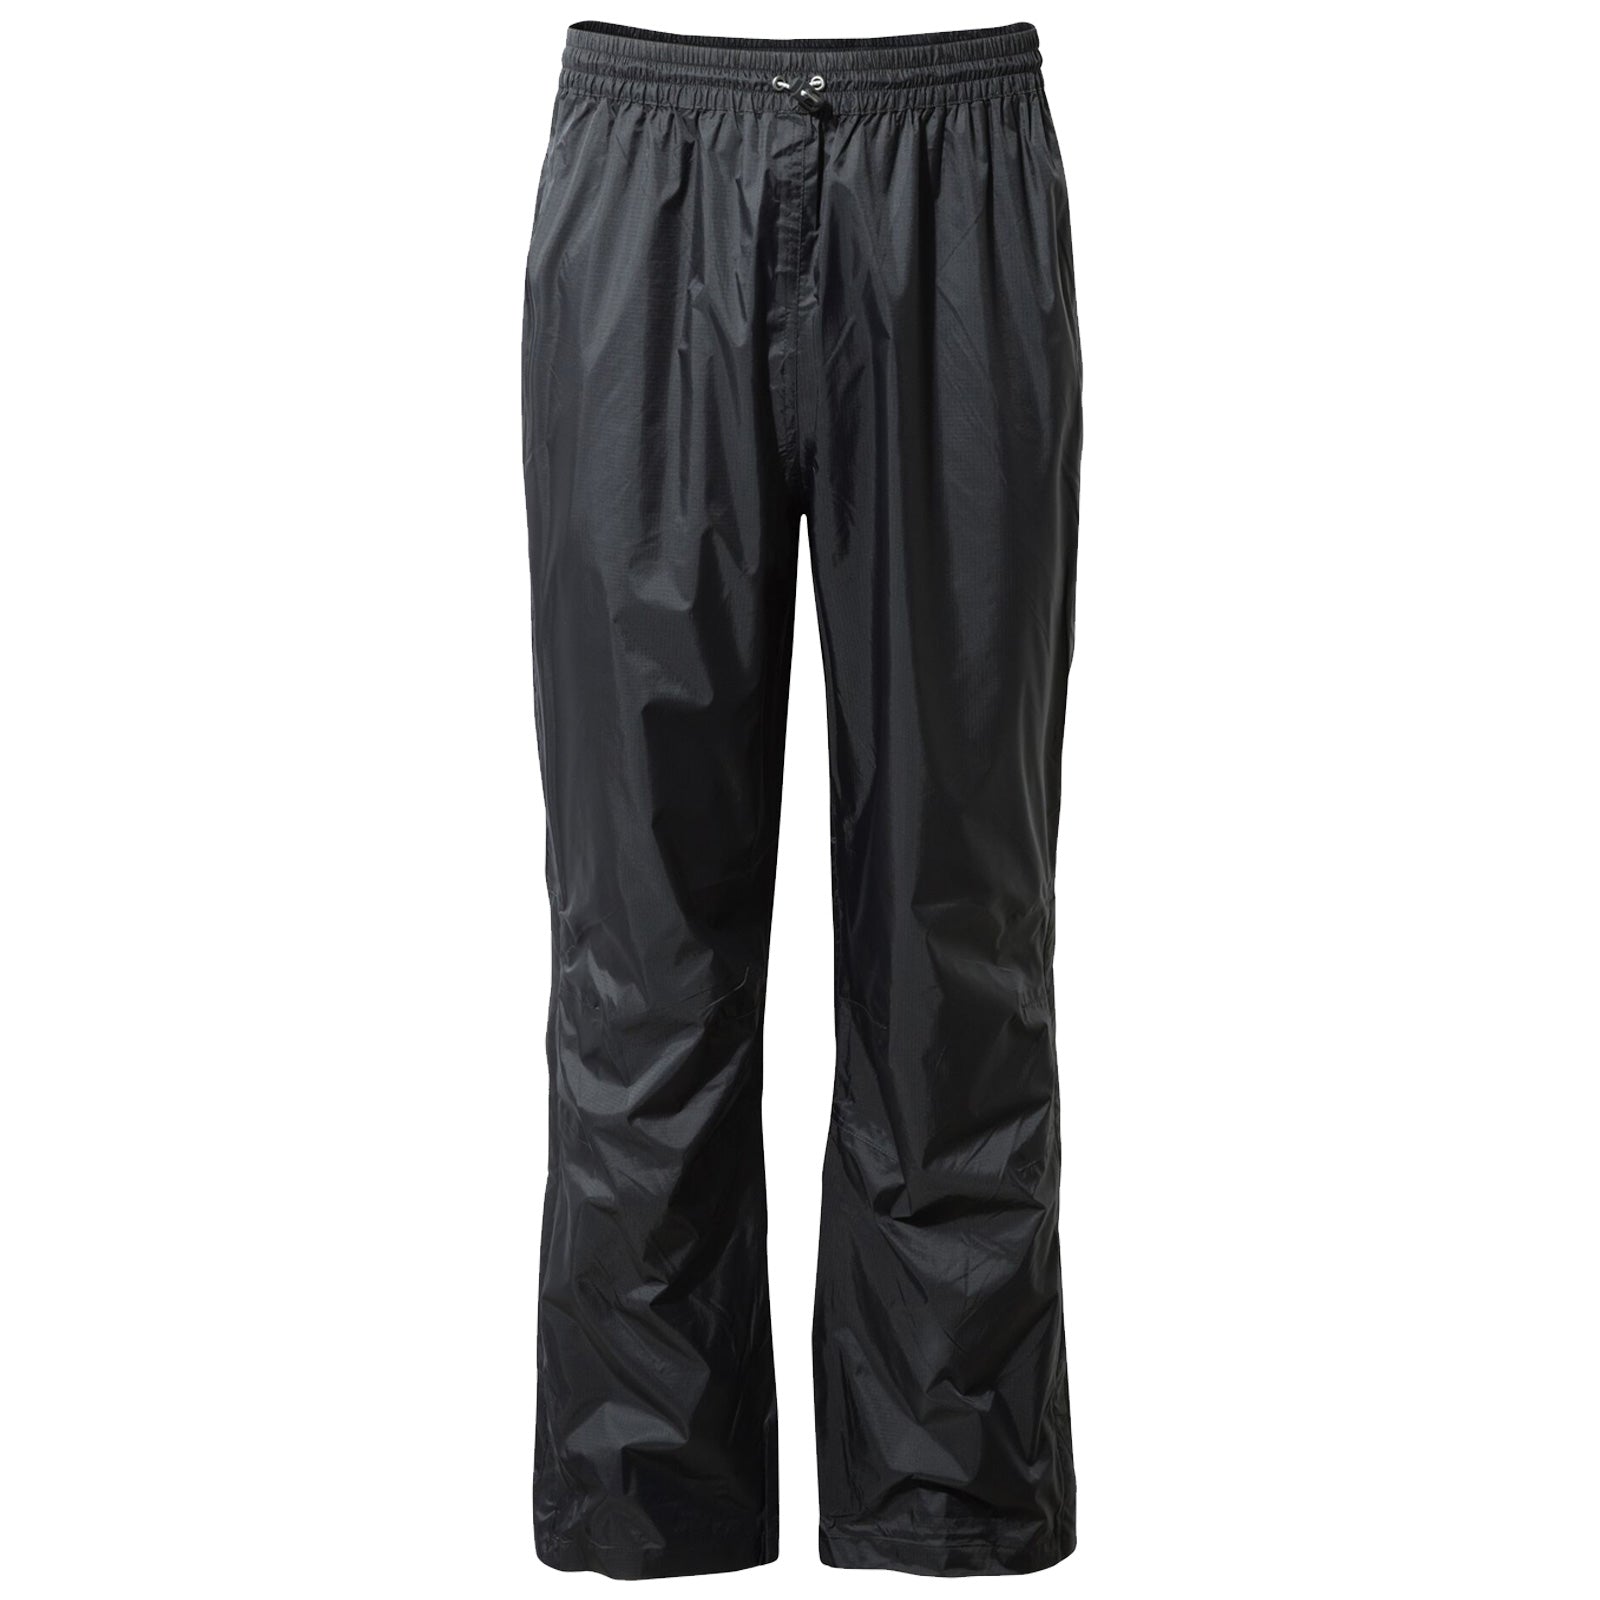 Craghoppers Unisex Ascent Waterproof Overtrousers